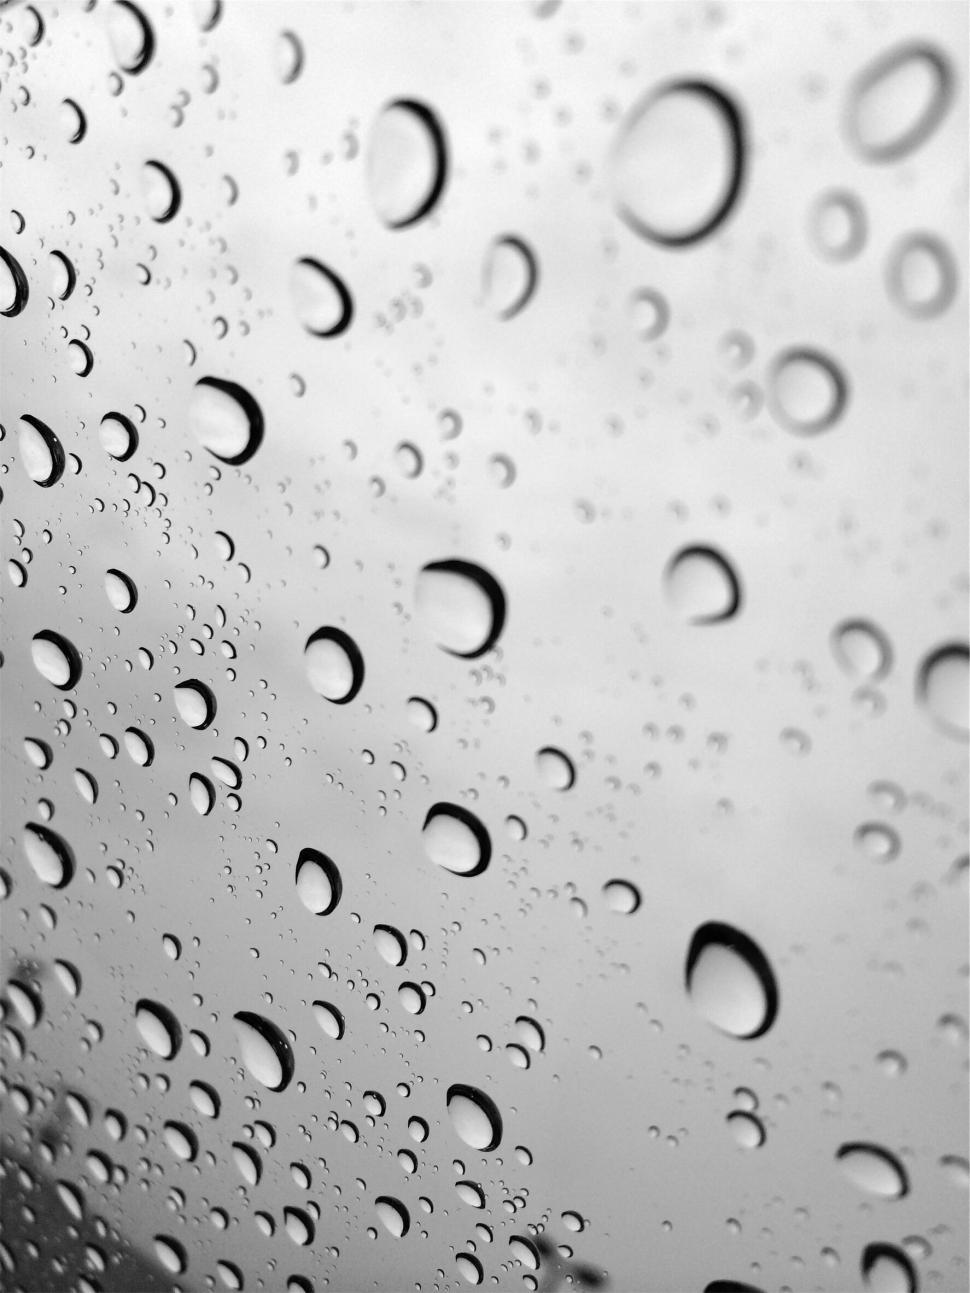 Free Image of Raindrops on a window glass surface 